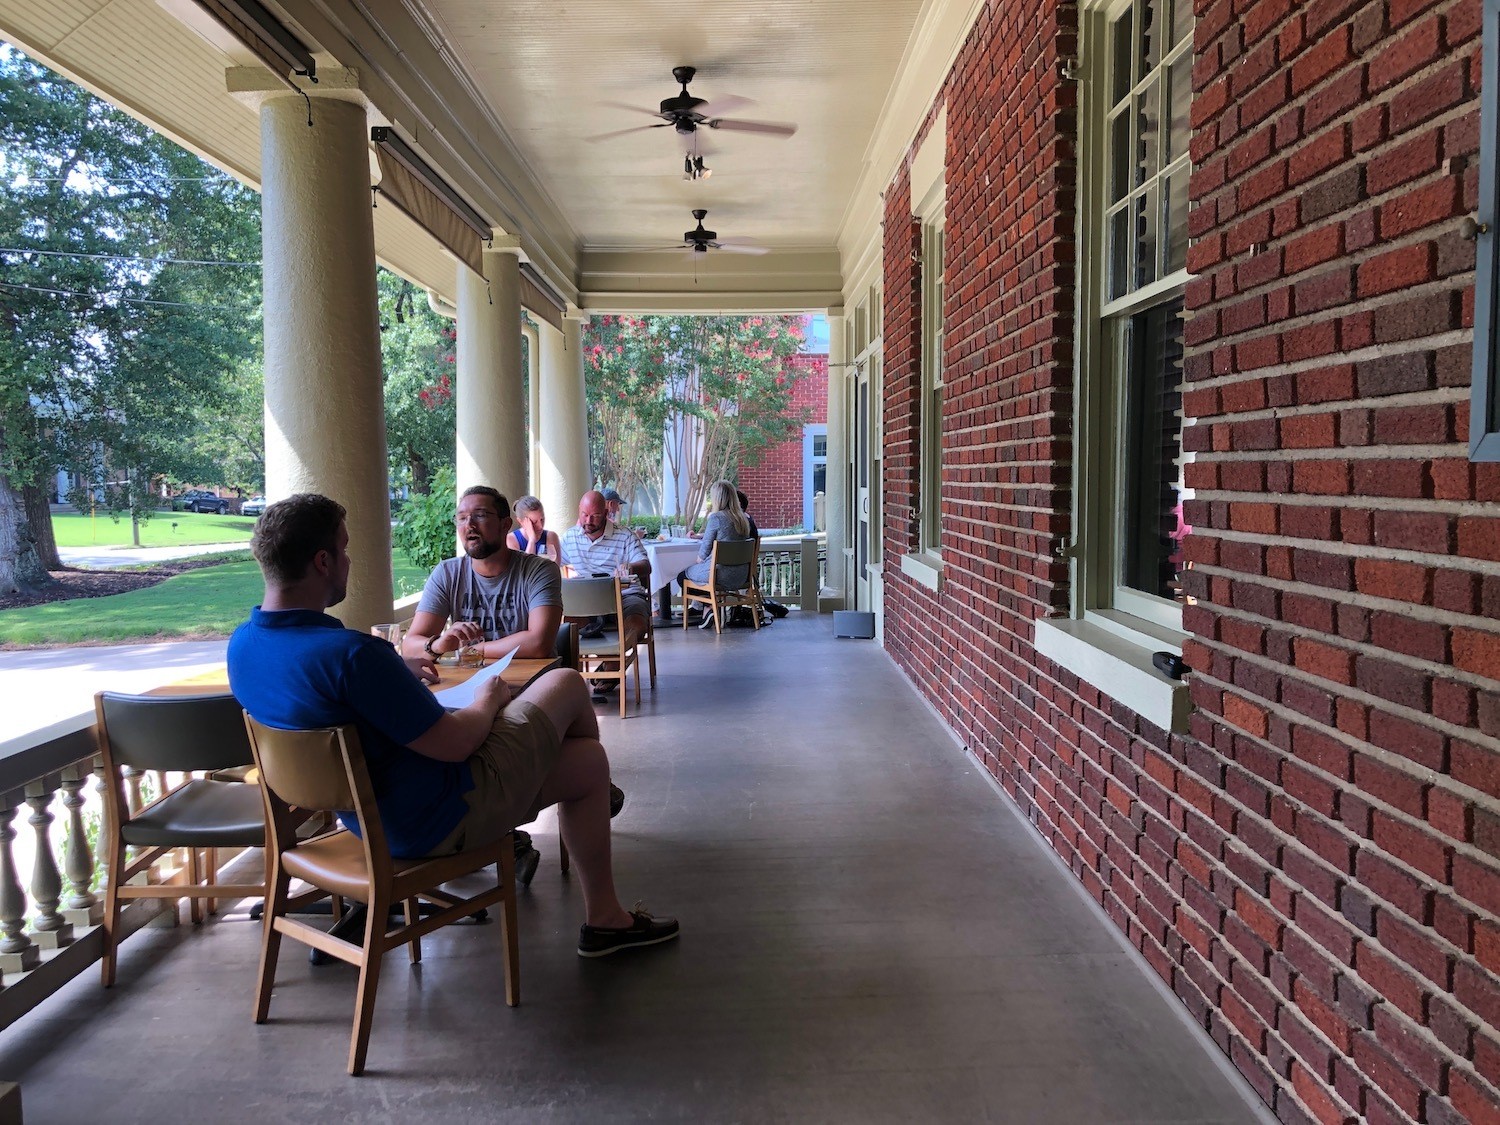 Porch outdoor dining at Five & Ten, a restaurant in Athens, Georgia. September 2020